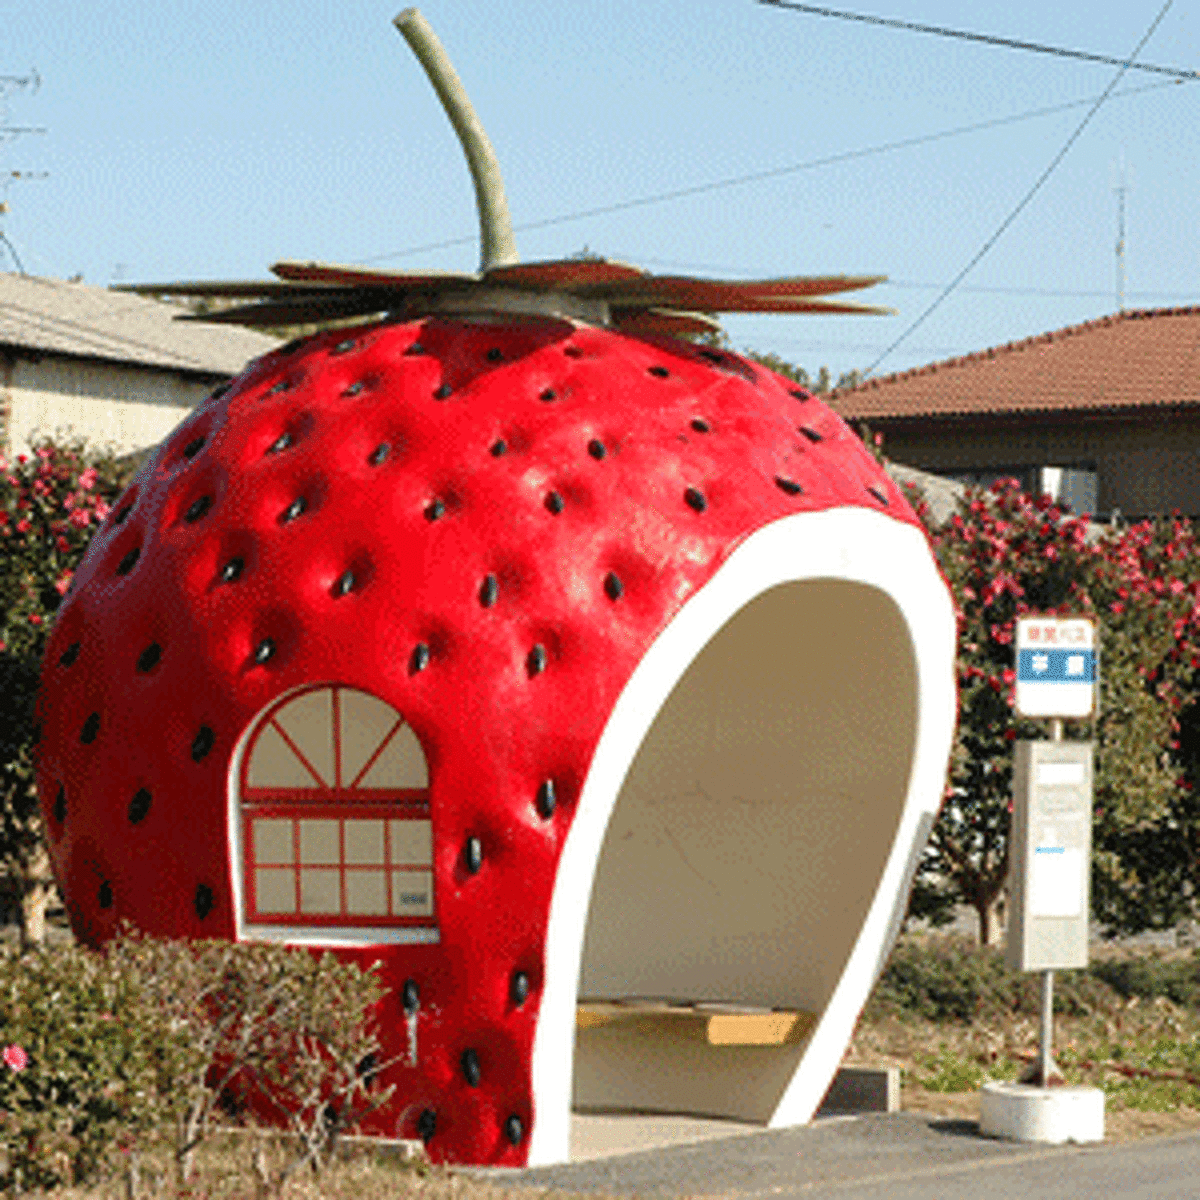 This giant strawberry is where riders wait for the bus in Konagai, Japan. It's one of 16 fruity bus shelters in the region. They were originally constructed for the 1990 Travel Expo but have become a local tourist attraction, according to the Inhabitat blog.